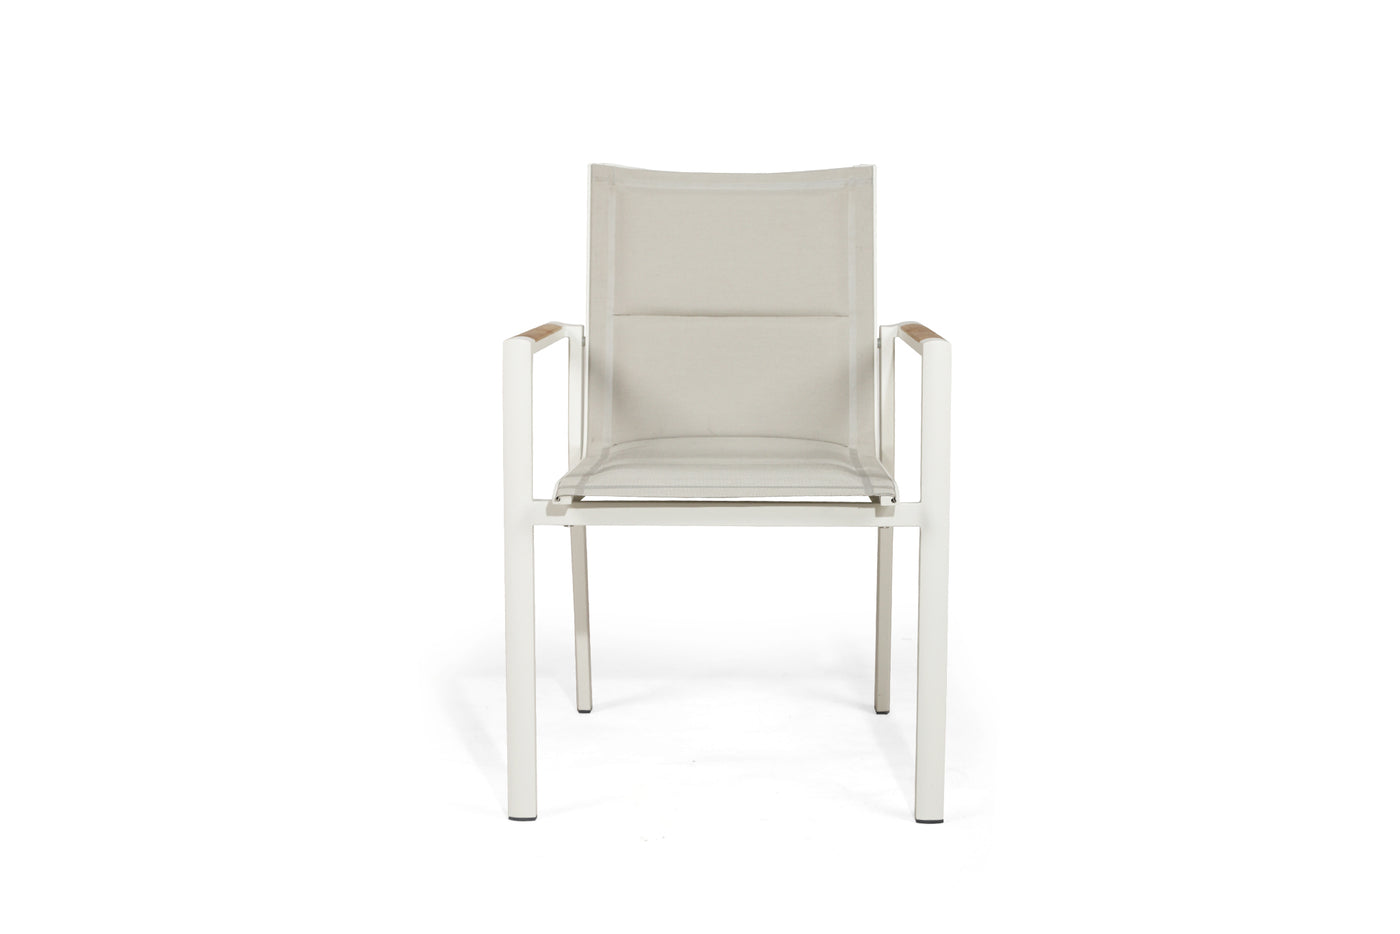 Deniro Stackable Outdoor Dining Chair -White - Set of 4